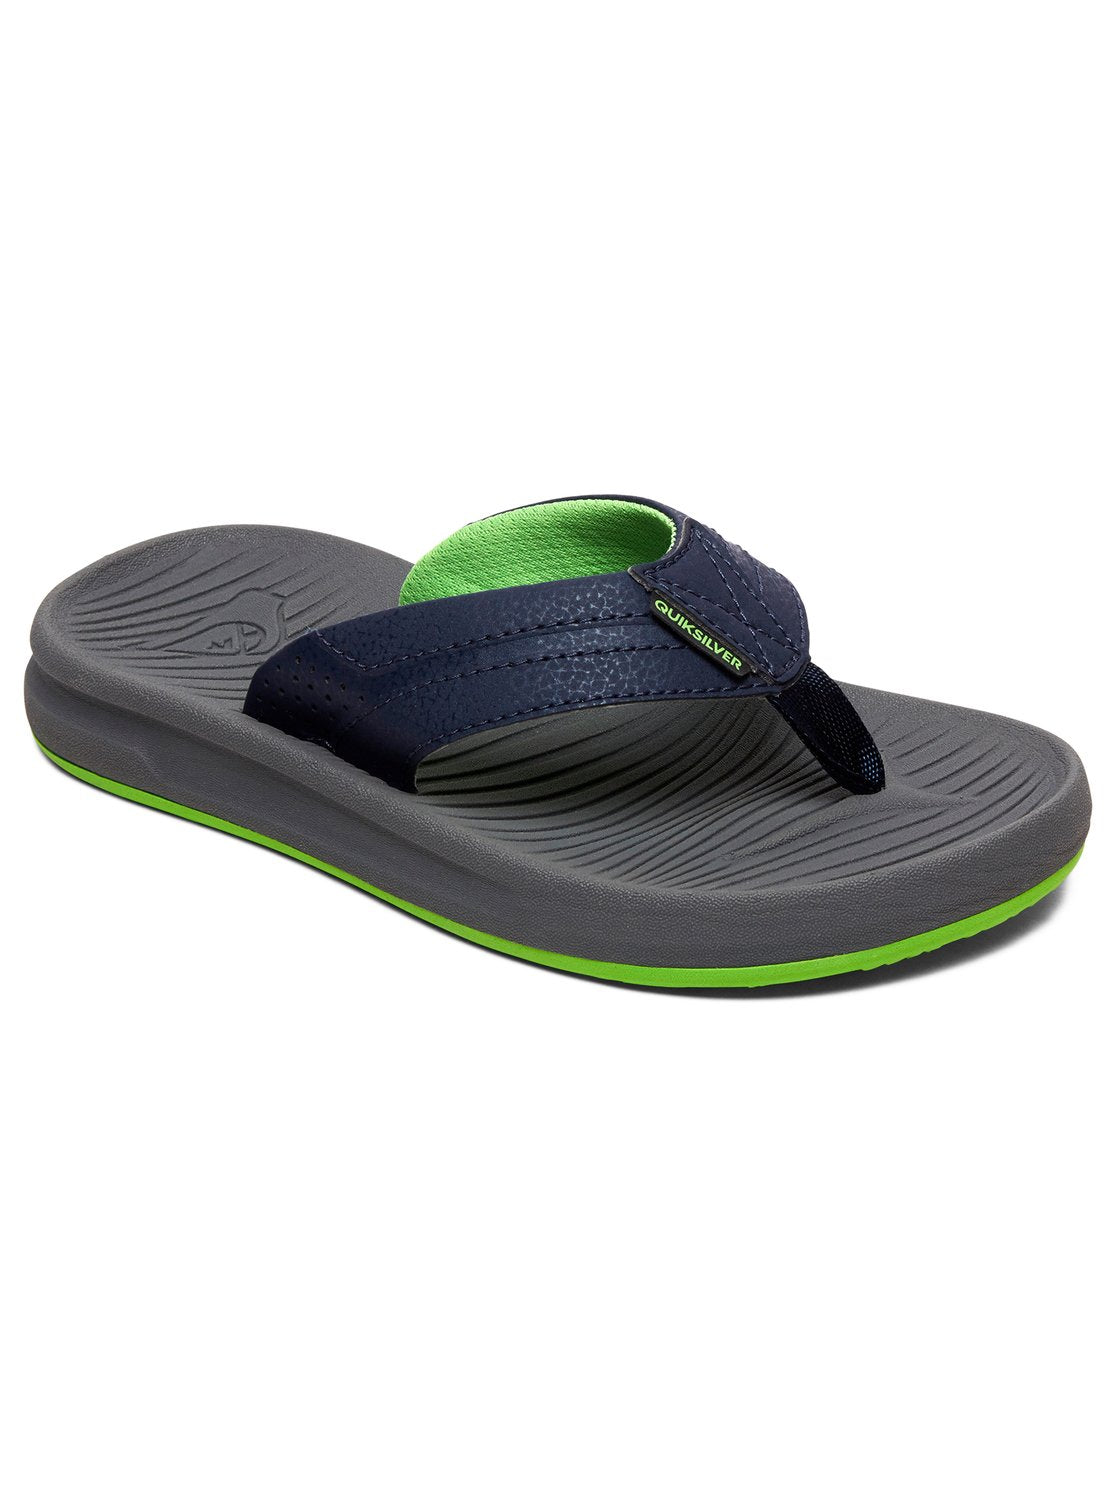 Quiksilver Oasis Youth Sandals XBSB-Blue-Grey-Blue 5 Y